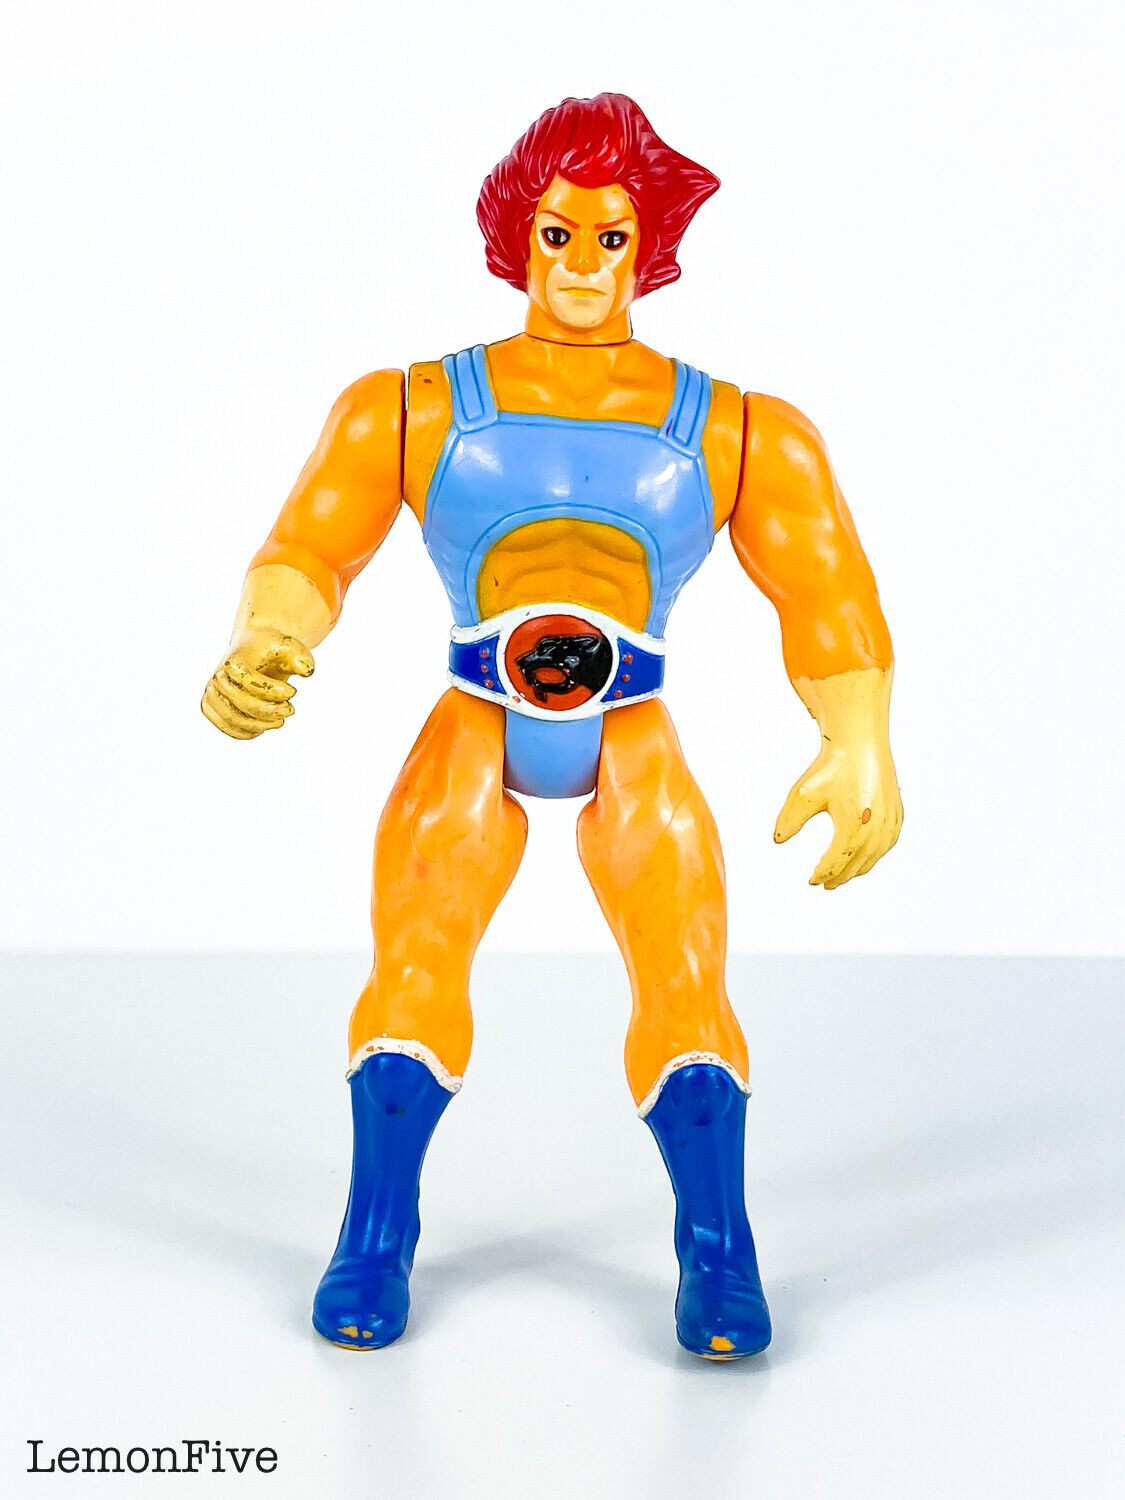 THUNDERCATS - LION-O - Red Hair Vintage 1985 Telepix Action Figure #3